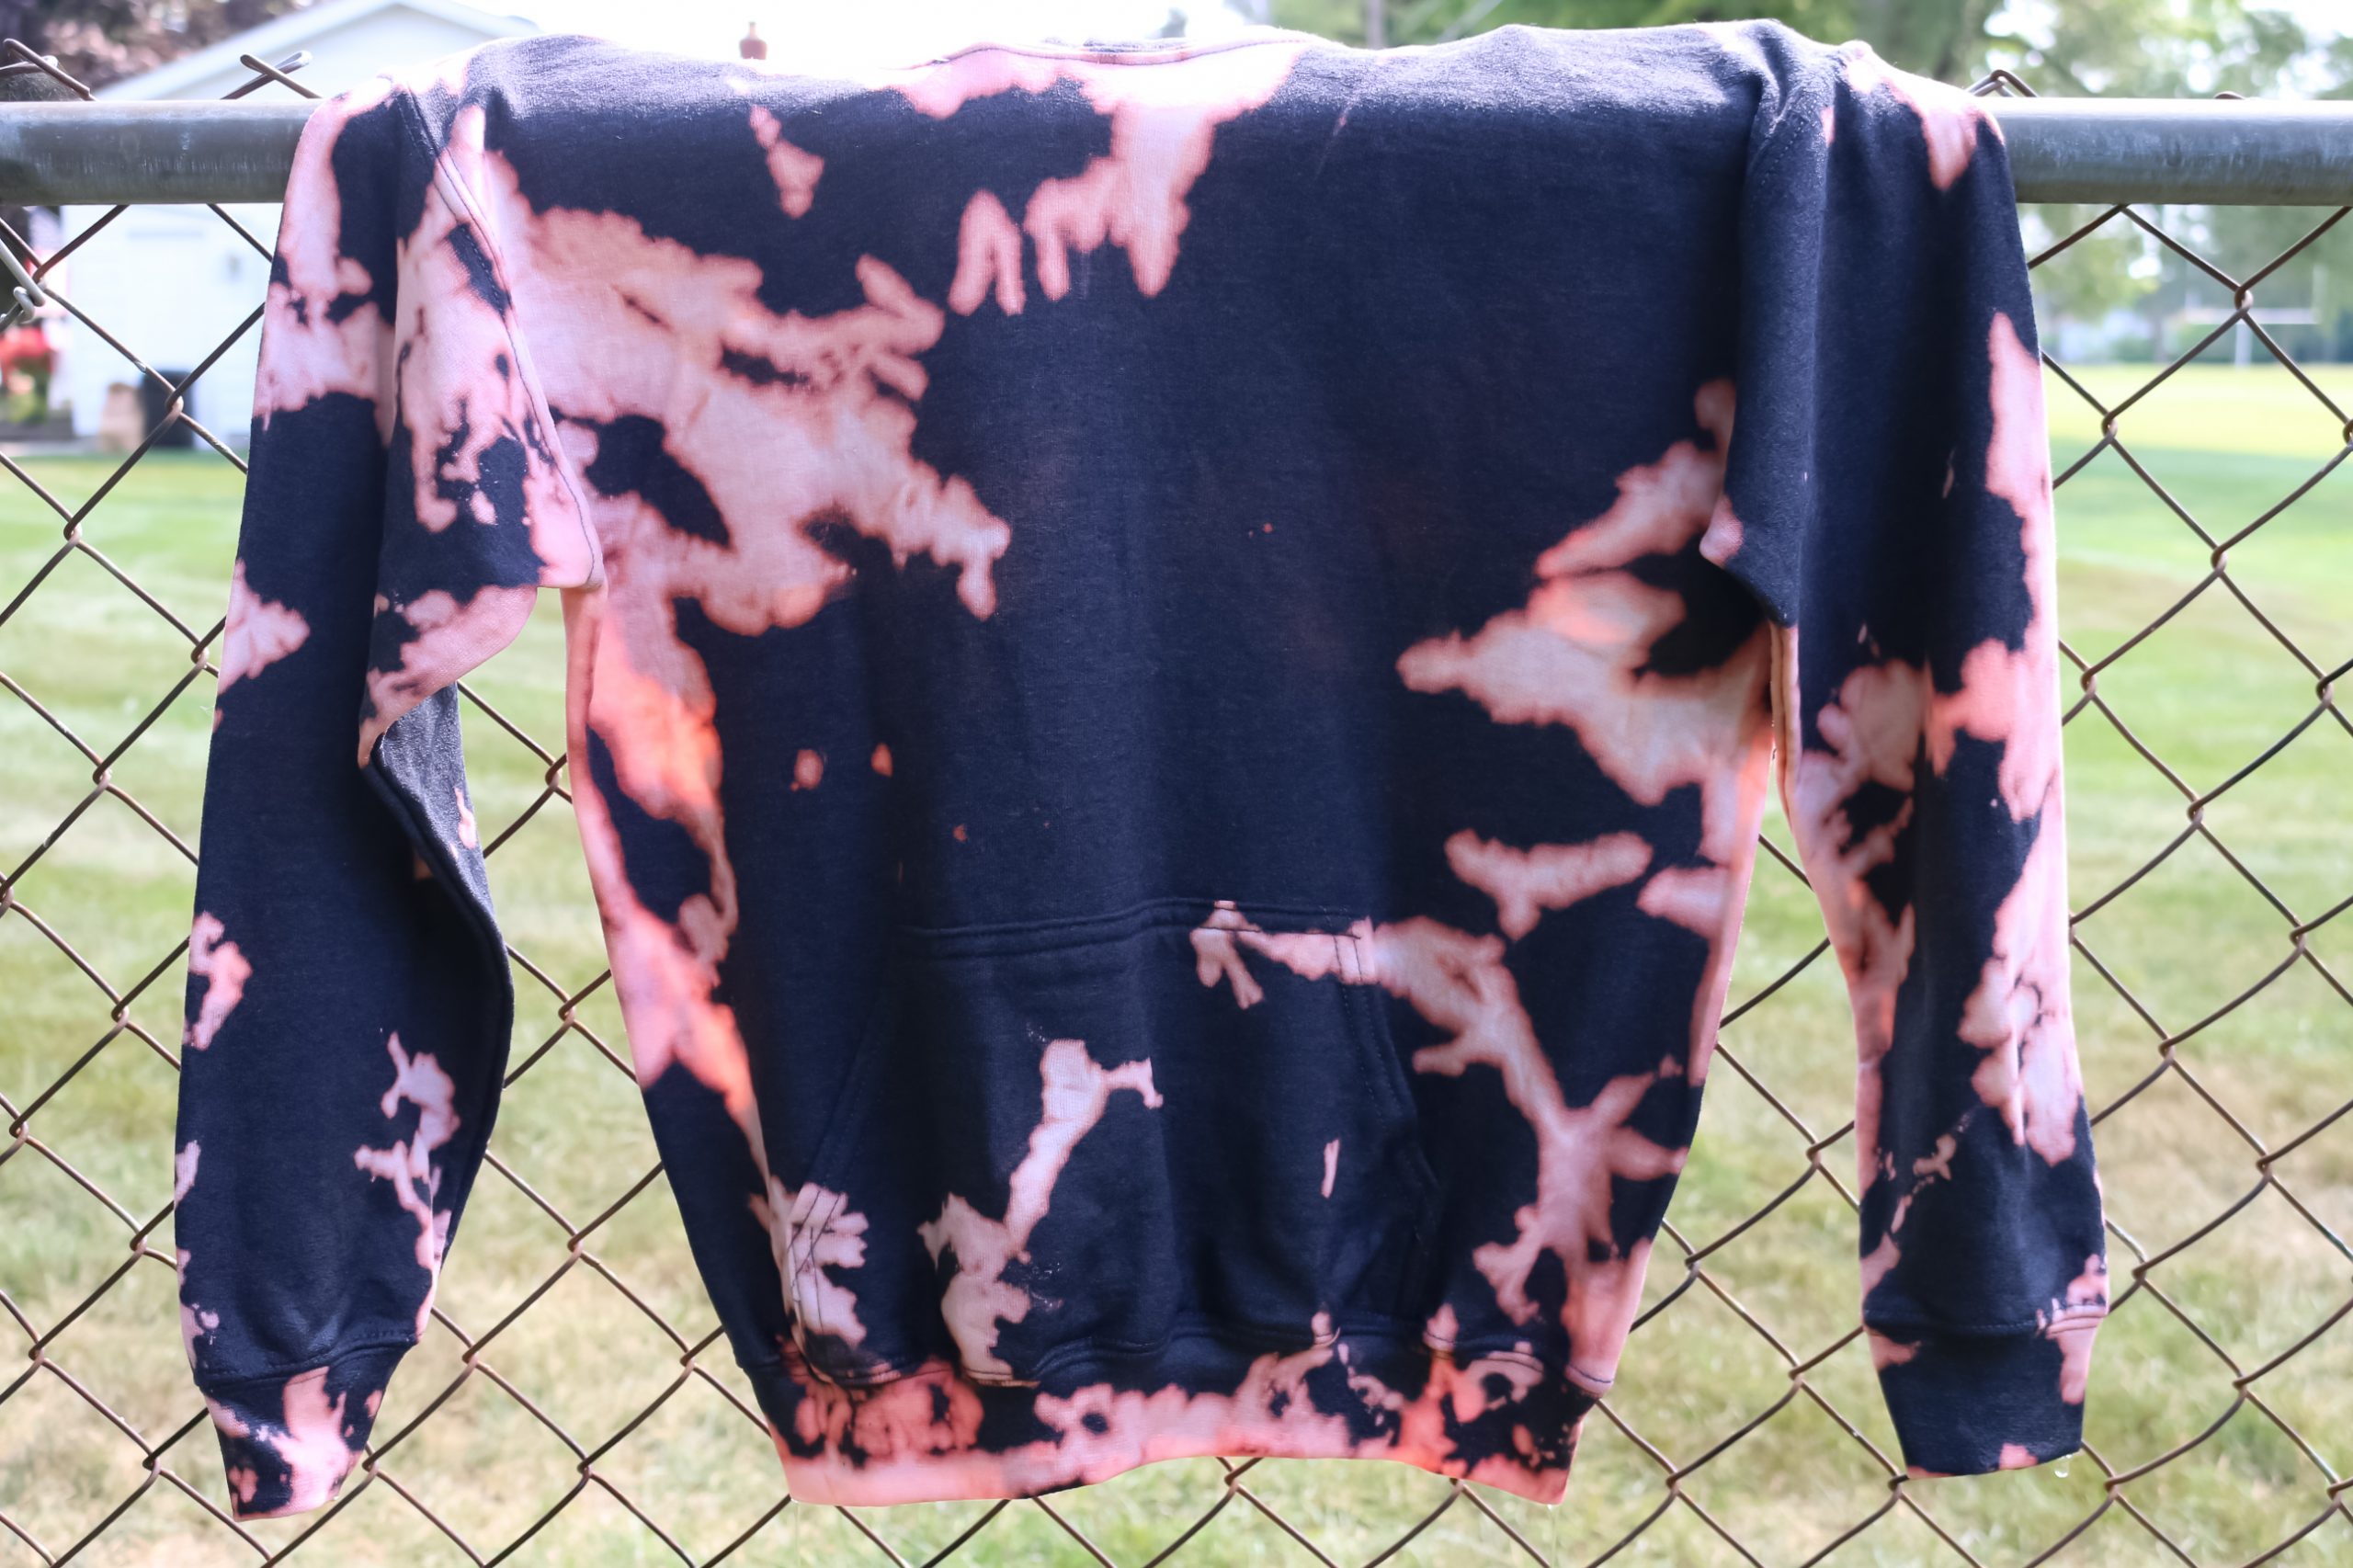 bleach dyed sweatshirt drying on a fence